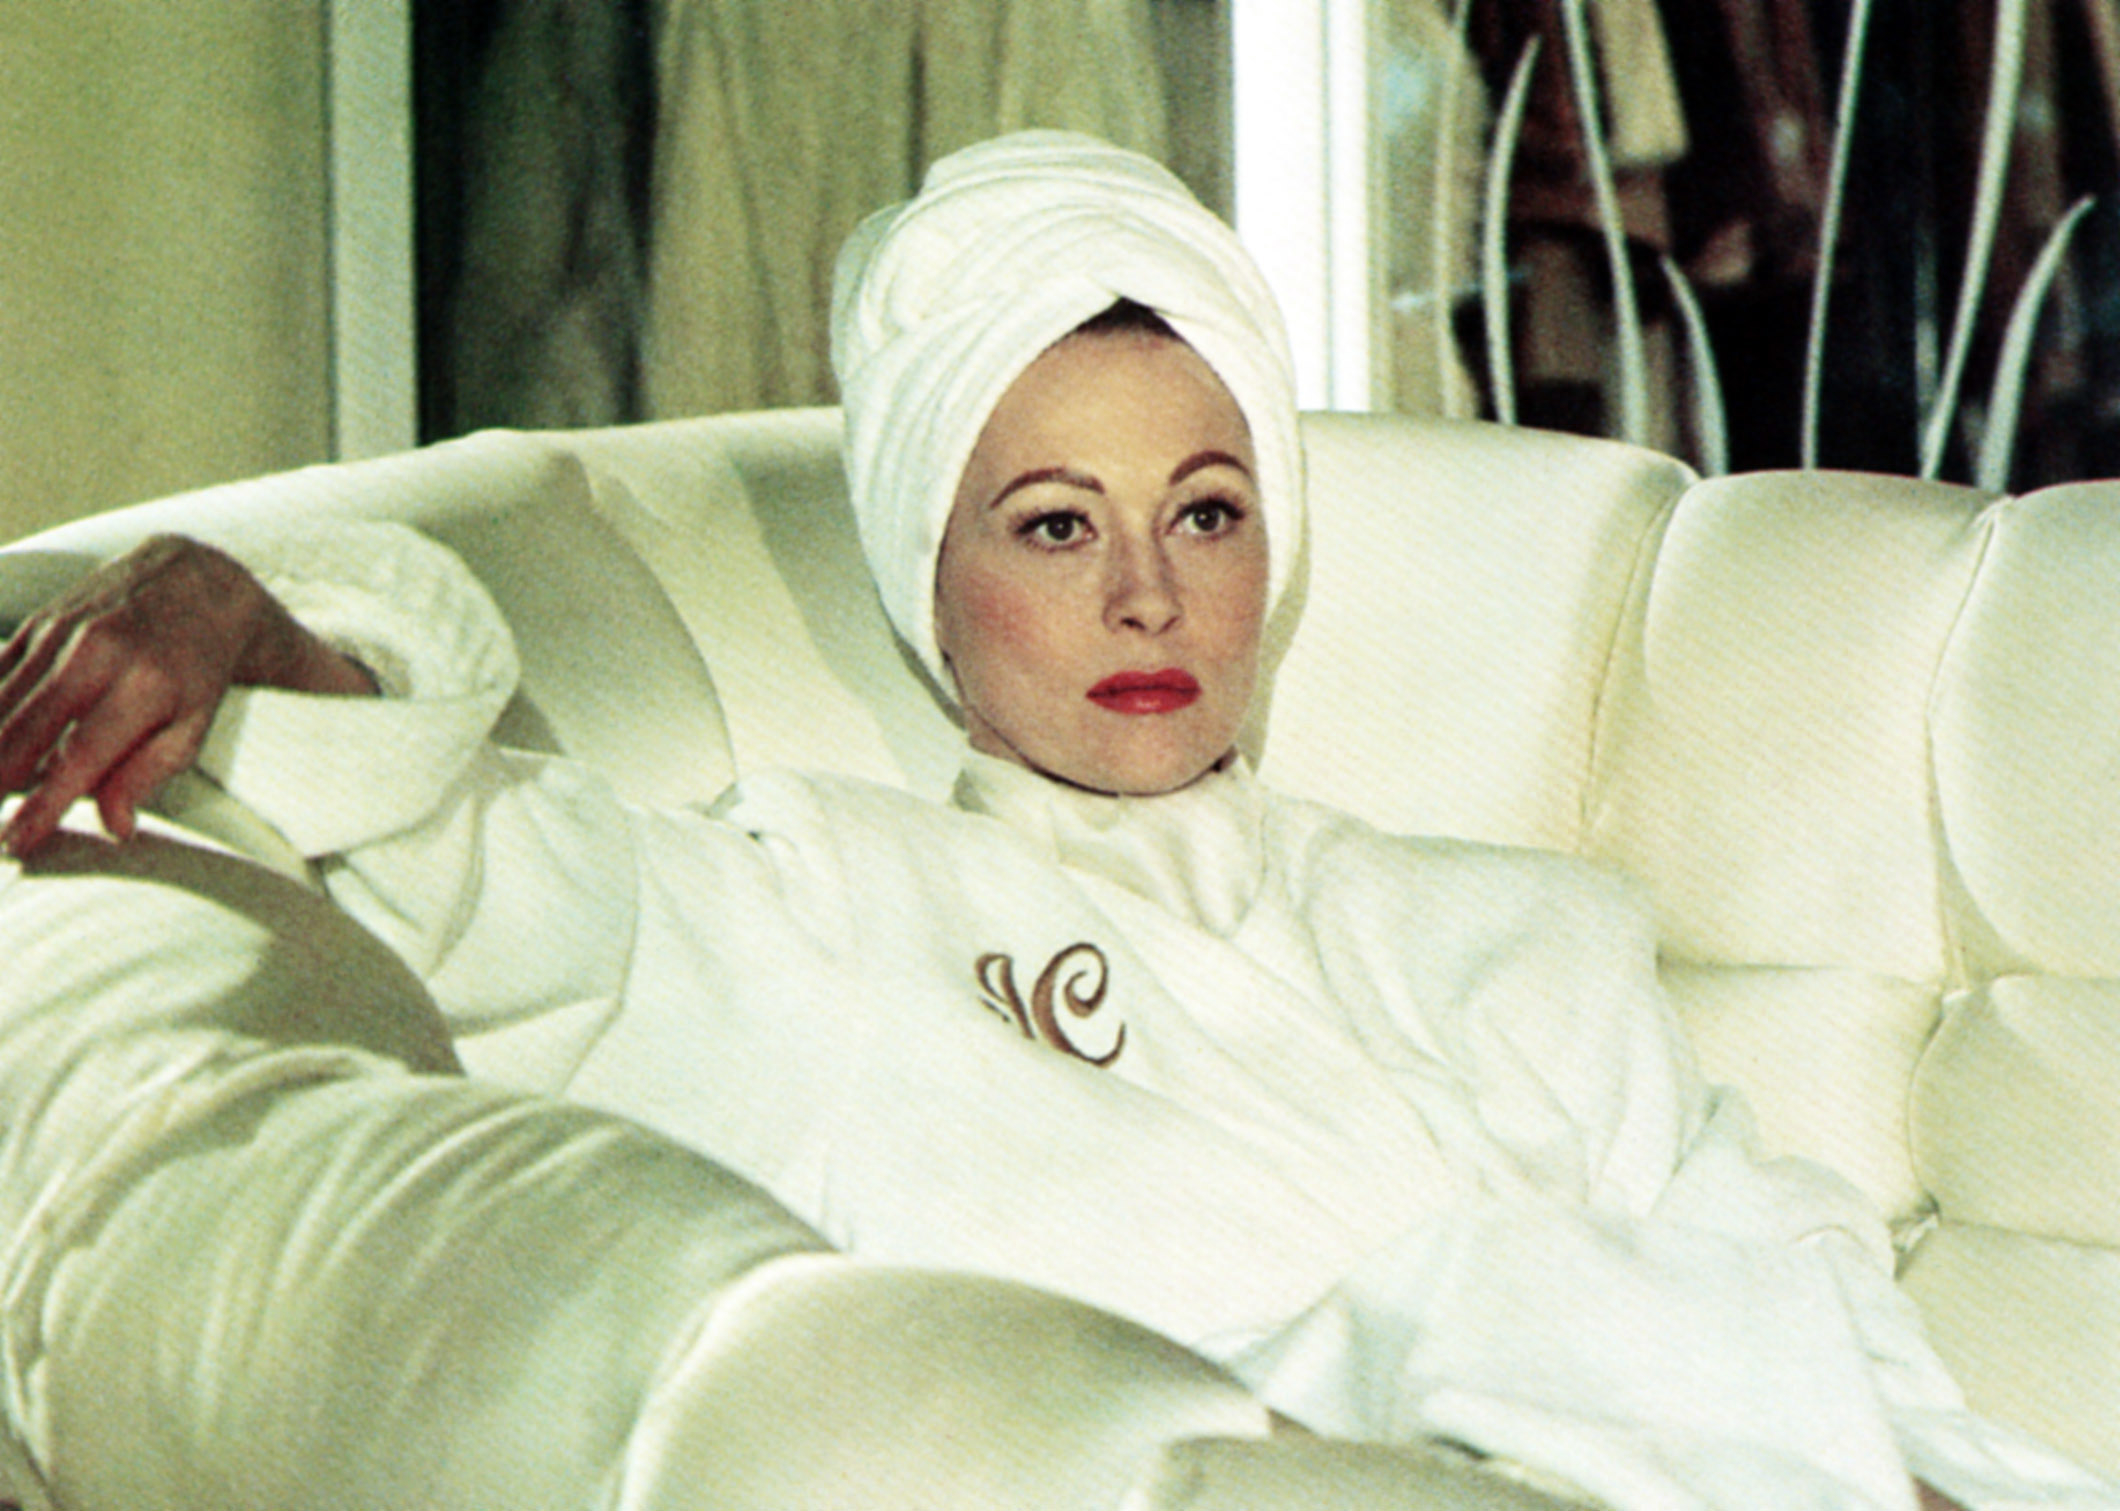 Faye Dunaway in a white outfit with a head wrap sits on a white couch, posing with a sophisticated demeanor